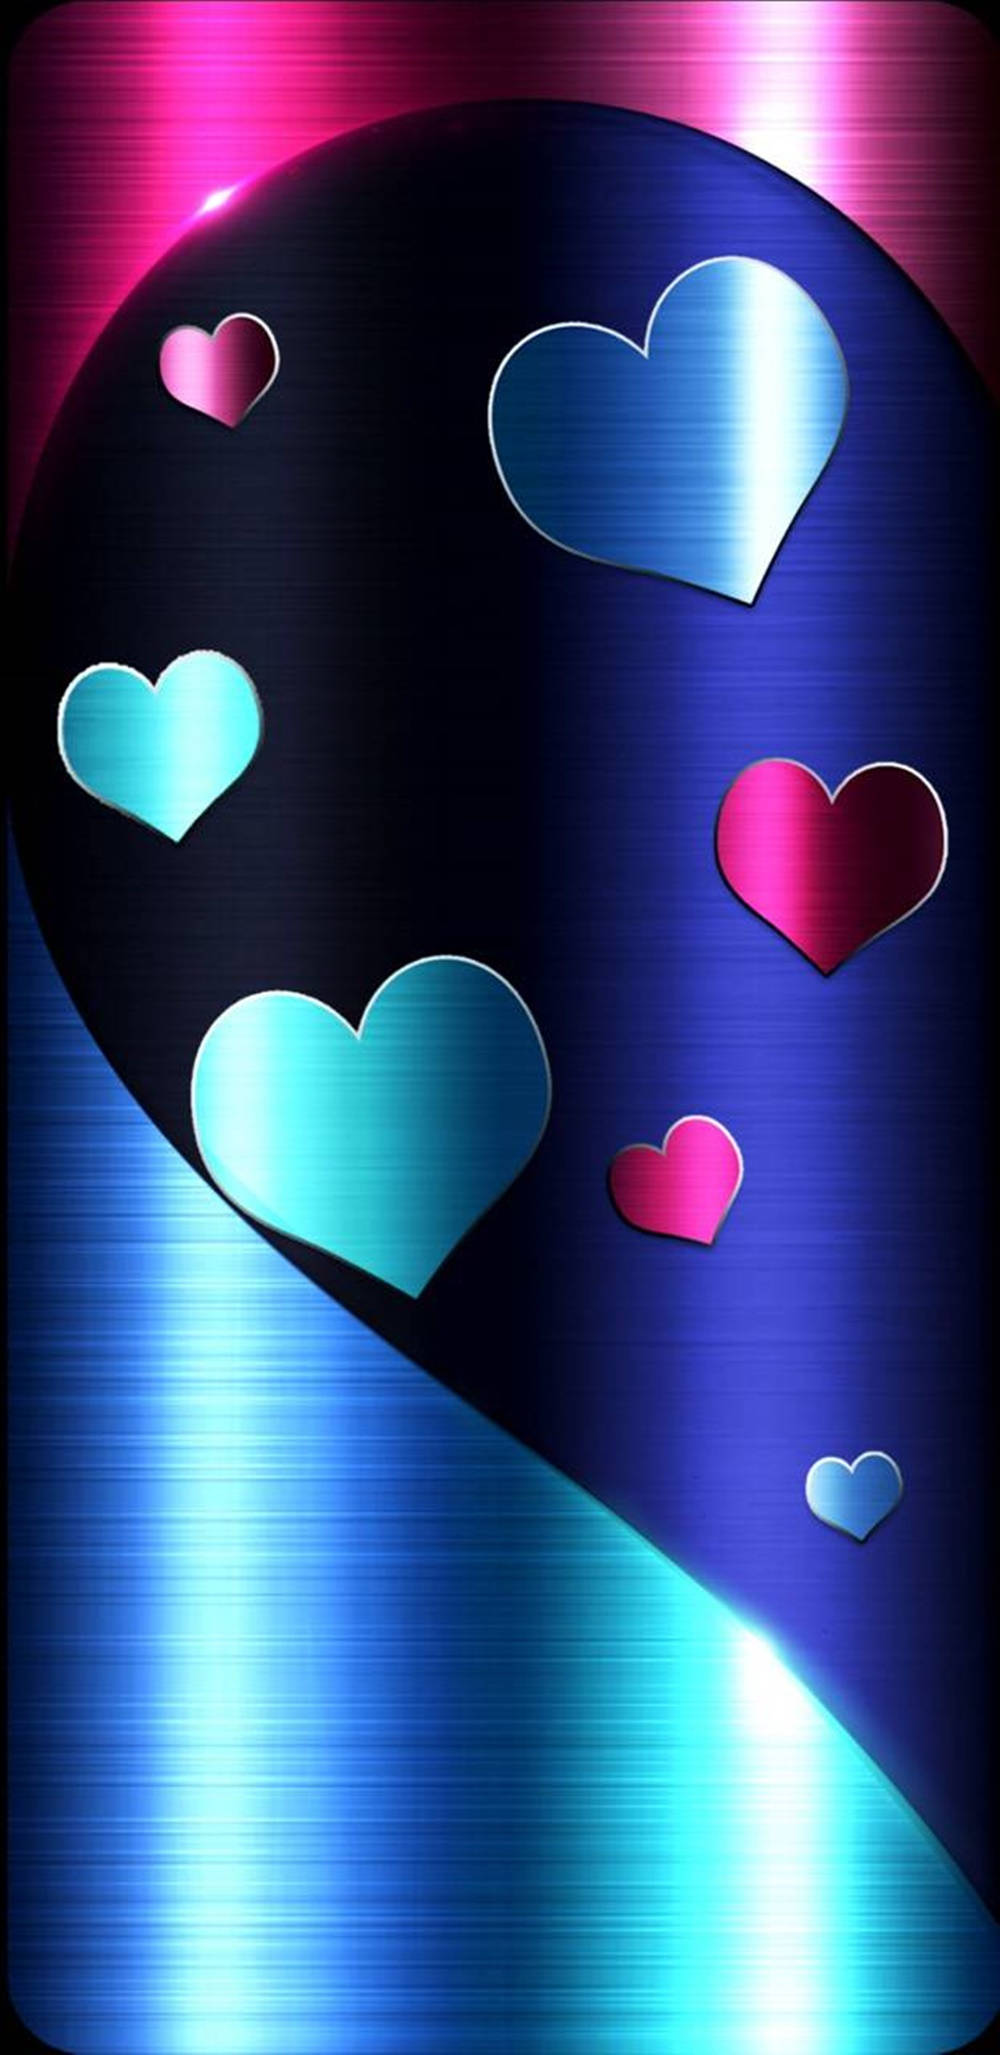 Cool Heart Iphone Background Wallpaper